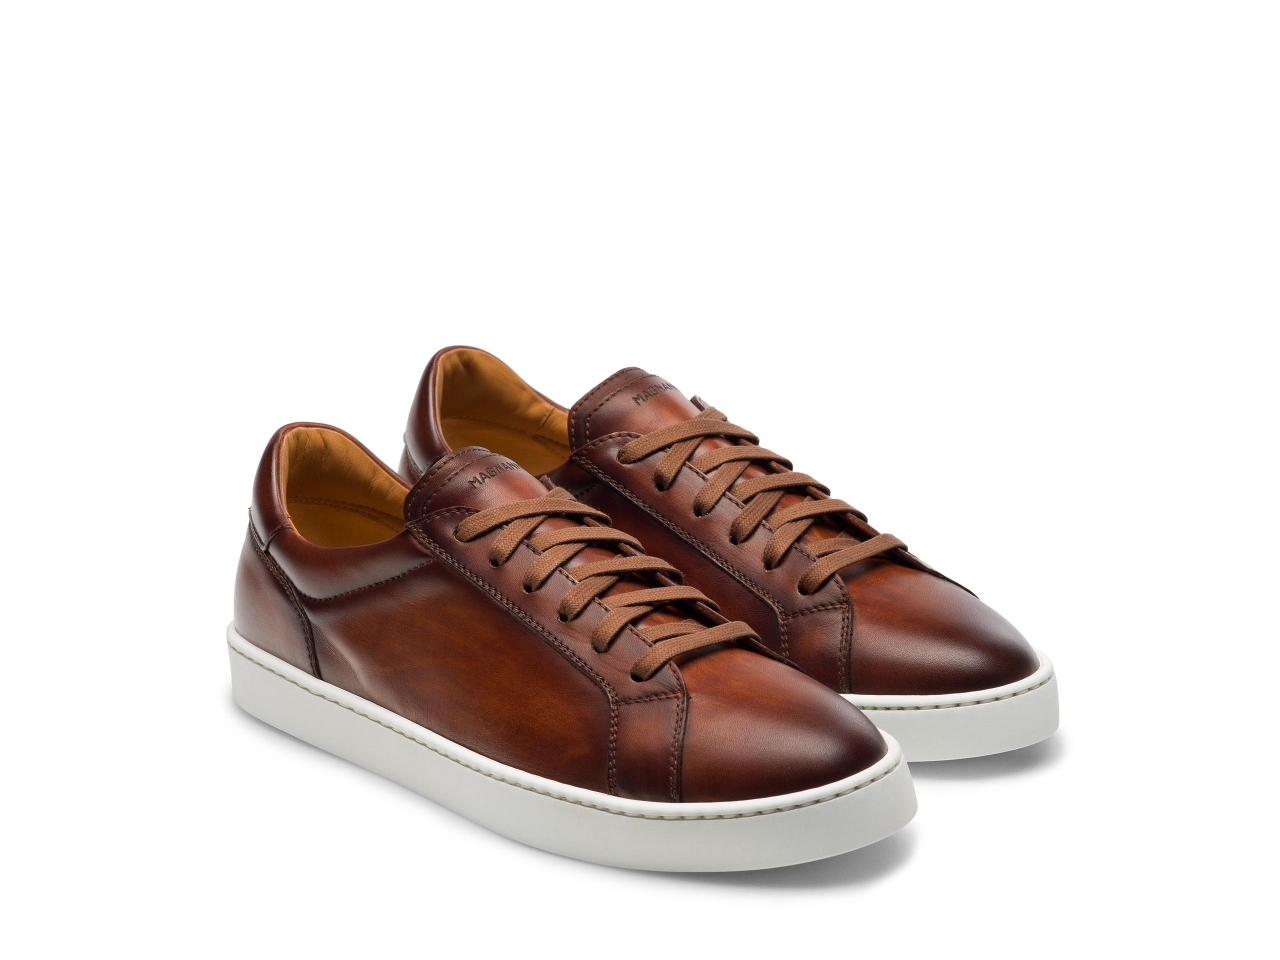 Low-top Sneaker Style: Magnanni Leather Low-top Sneakers